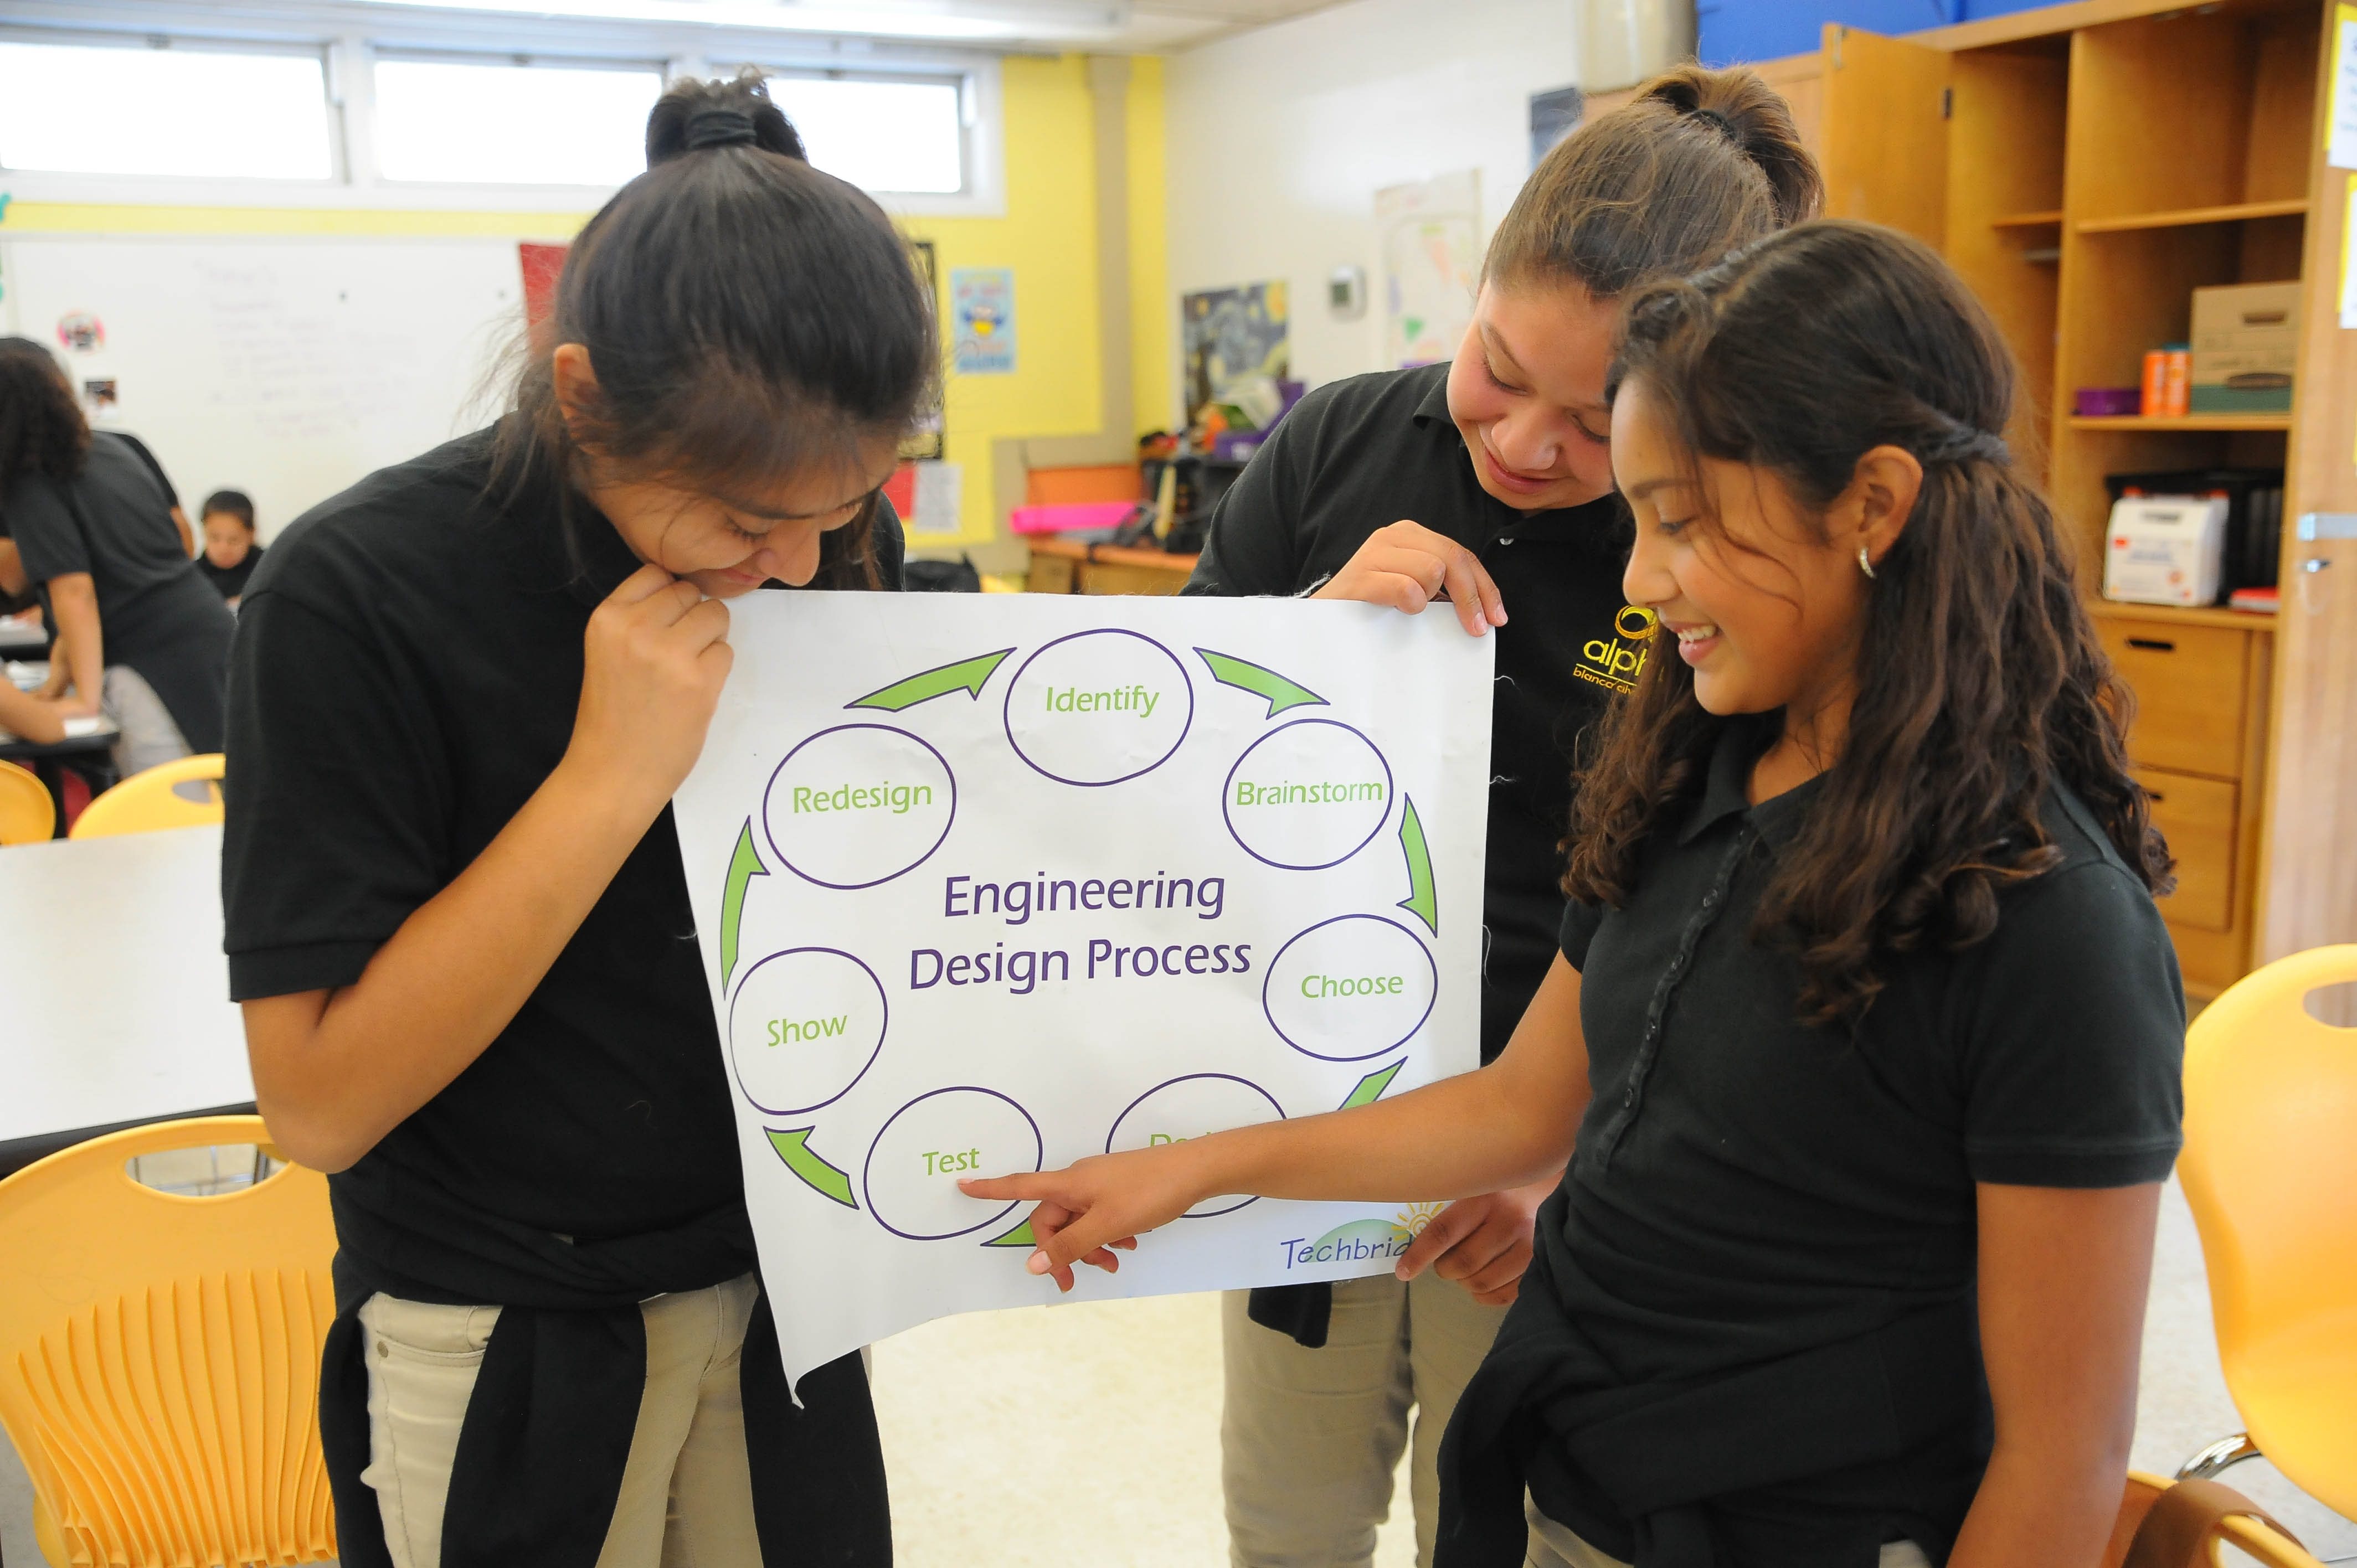 Teaching girls the engineering design process helps them develop a critical comfort level with mistakes, failure, risk and creative problem-solving.